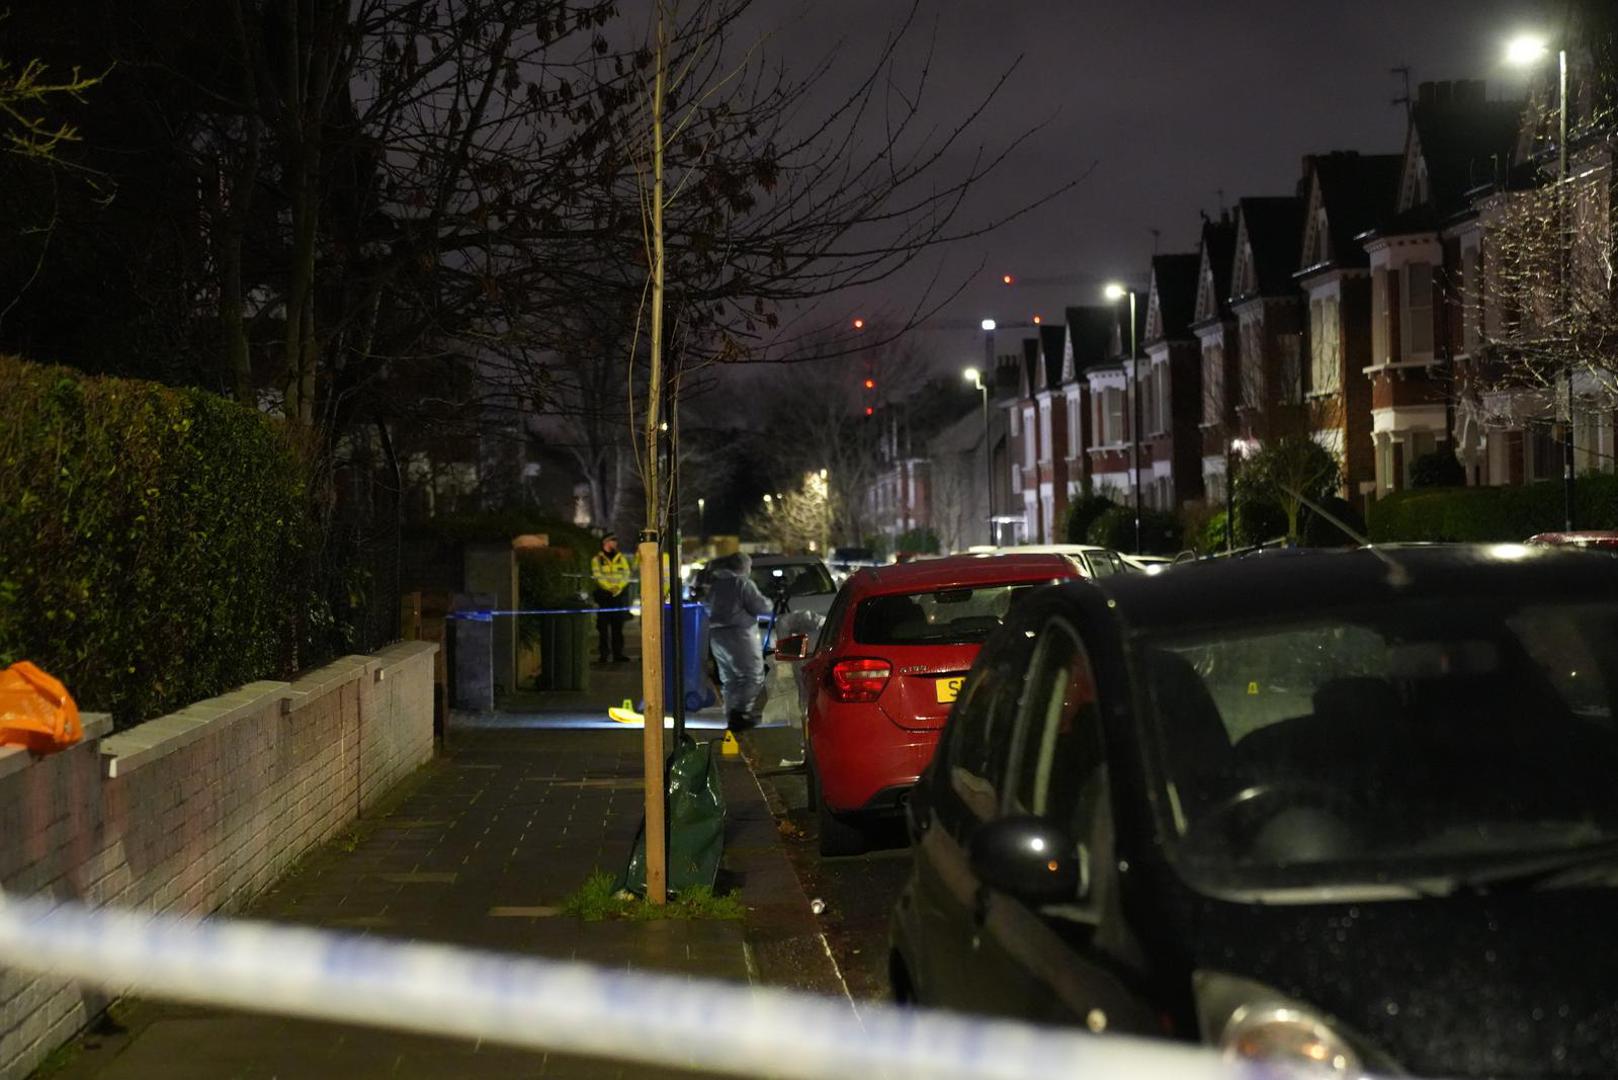 Police at the scene in Lessar Avenue near Clapham Common, south London, where a woman and her two young children have been taken to hospital after a man threw a suspected corrosive substance on Wednesday evening. Three other members of the public were also taken to hospital with injuries thought to have been suffered as they came to the aid of the woman and her children. Picture date: Thursday February 1, 2024. Photo: James Weech/PRESS ASSOCIATION